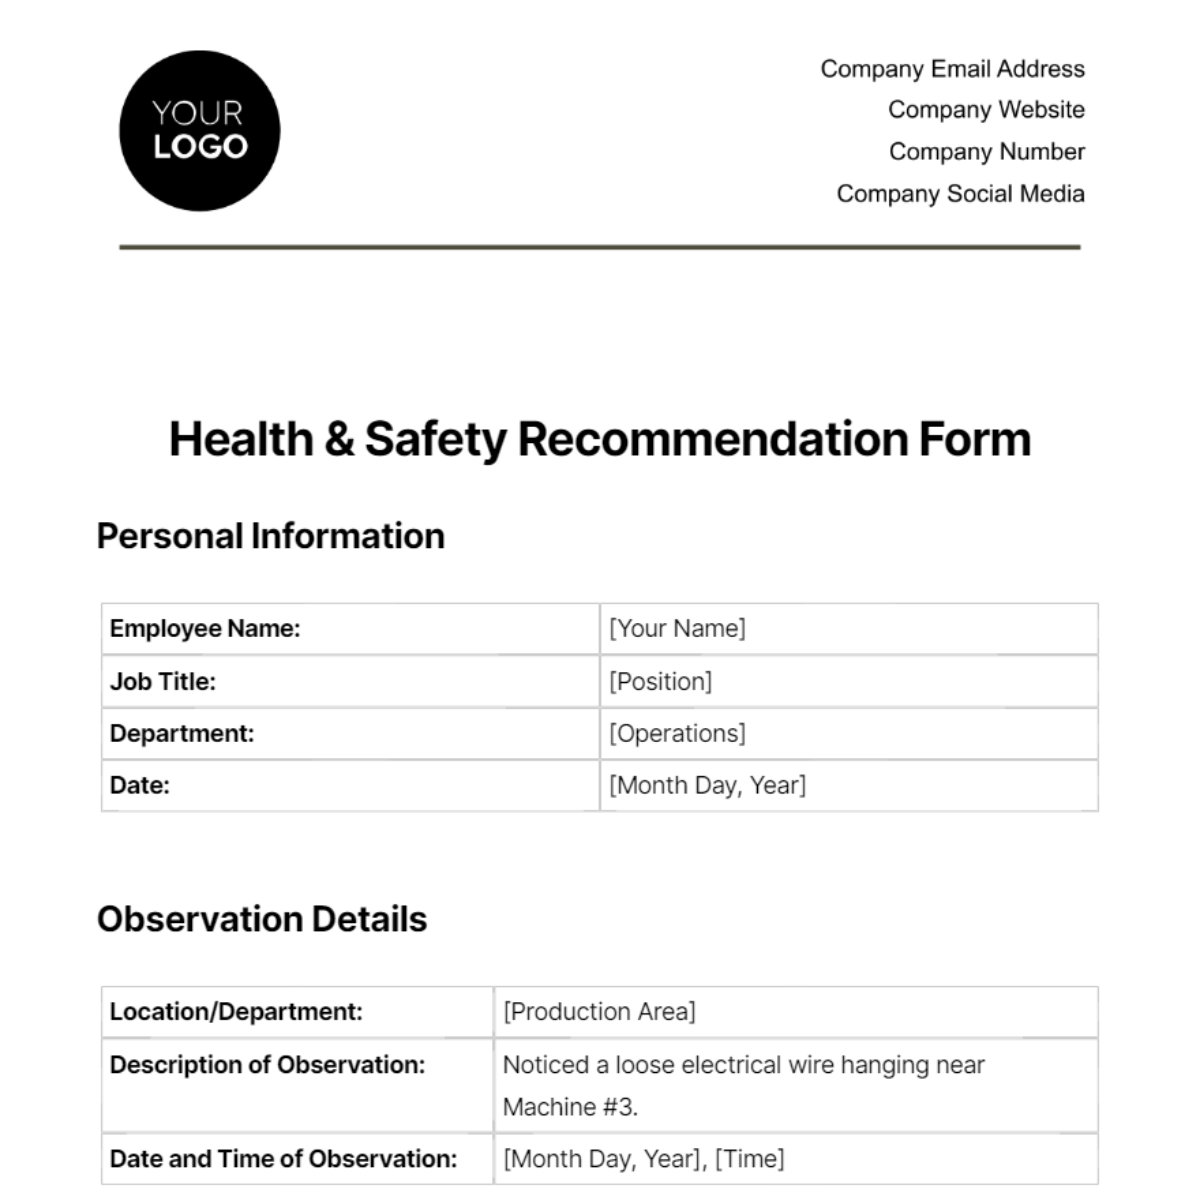 Health & Safety Recommendation Form Template